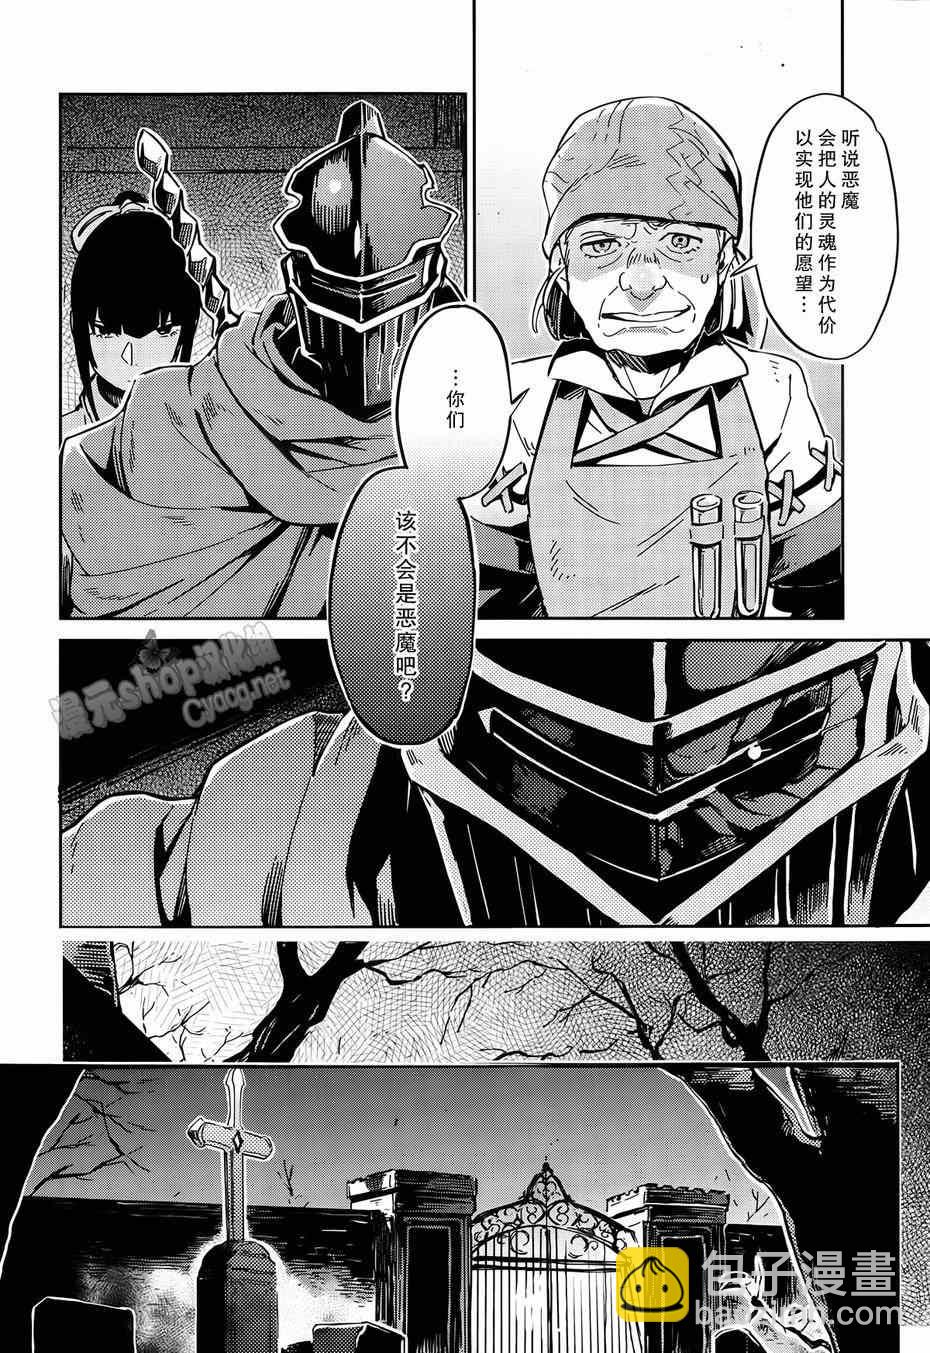 OVERLORD - 第7話 - 2